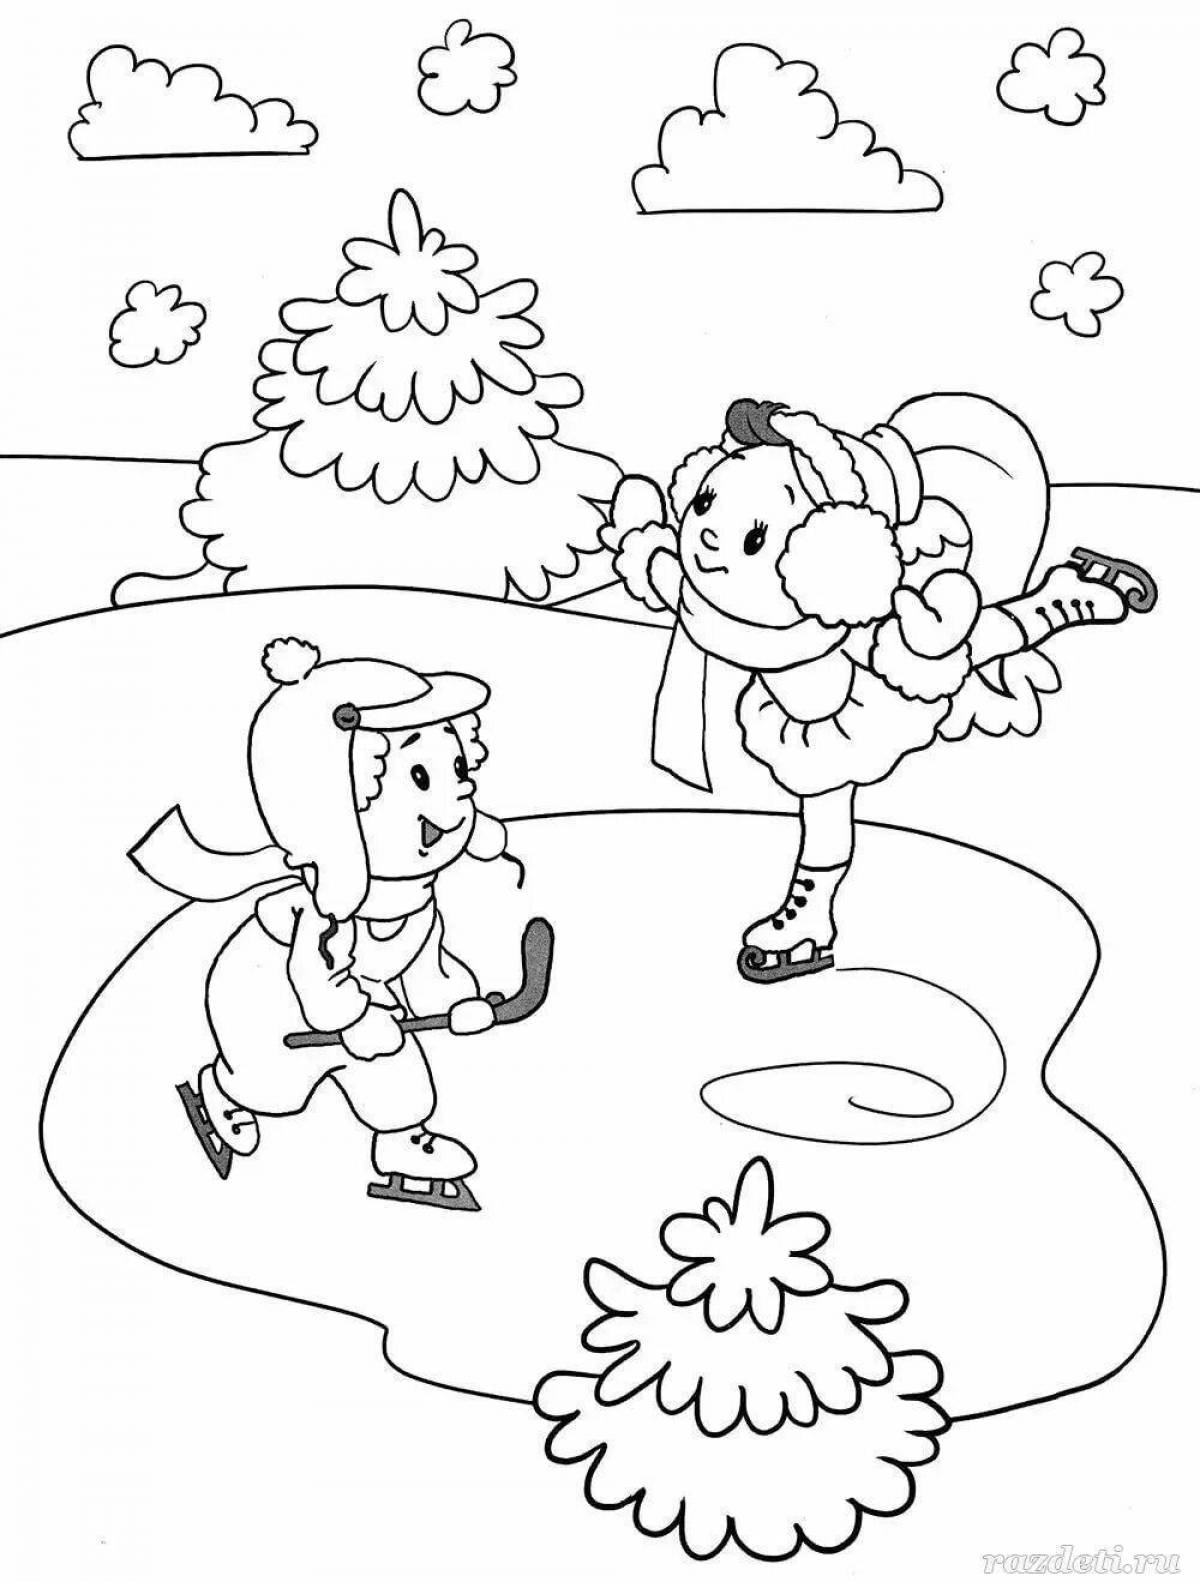 Adorable coloring picture of winter fun